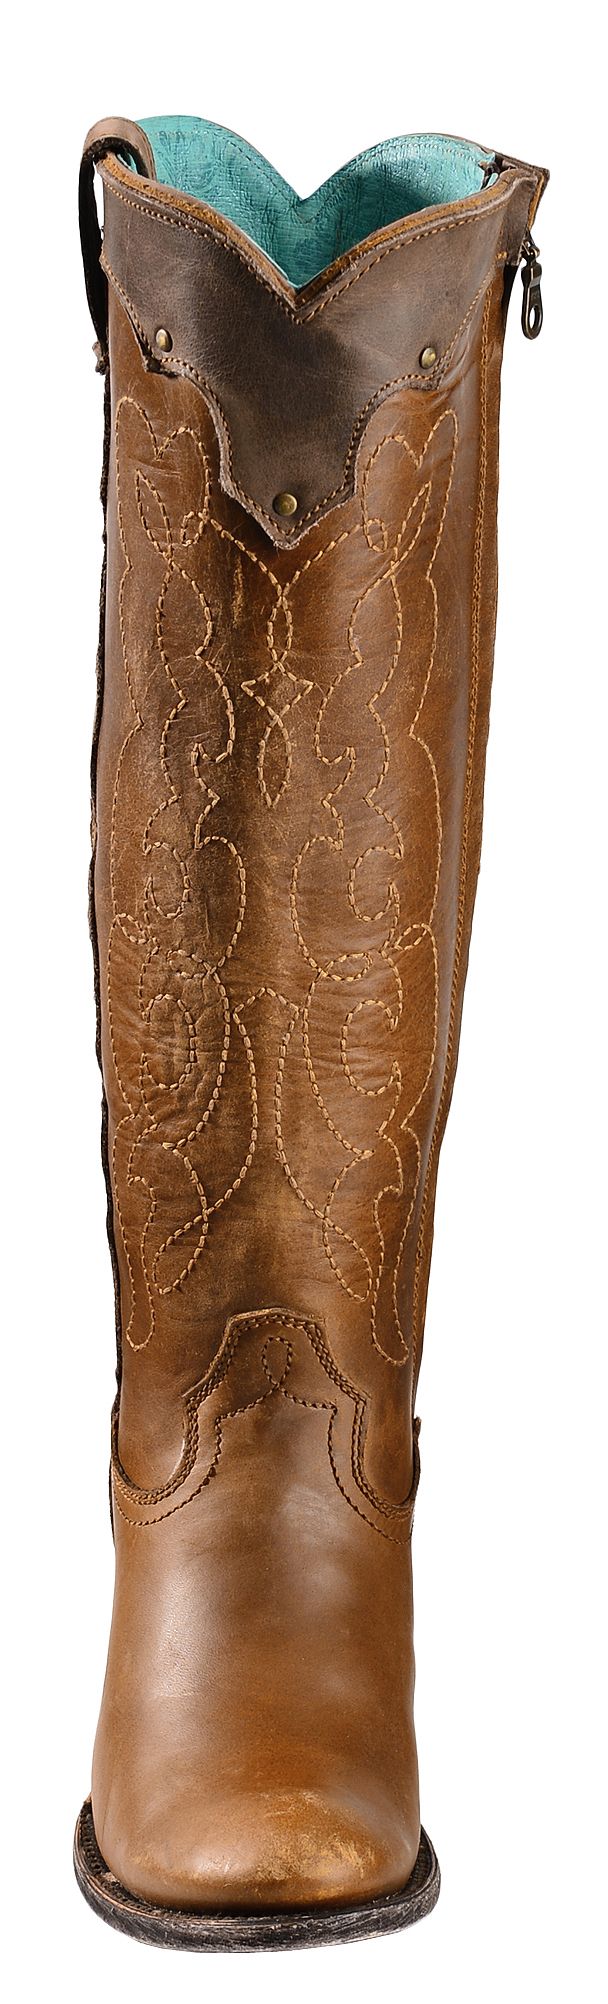 Corral Kats Natural Westport Cowgirl Boots - Round Toe - Country ...